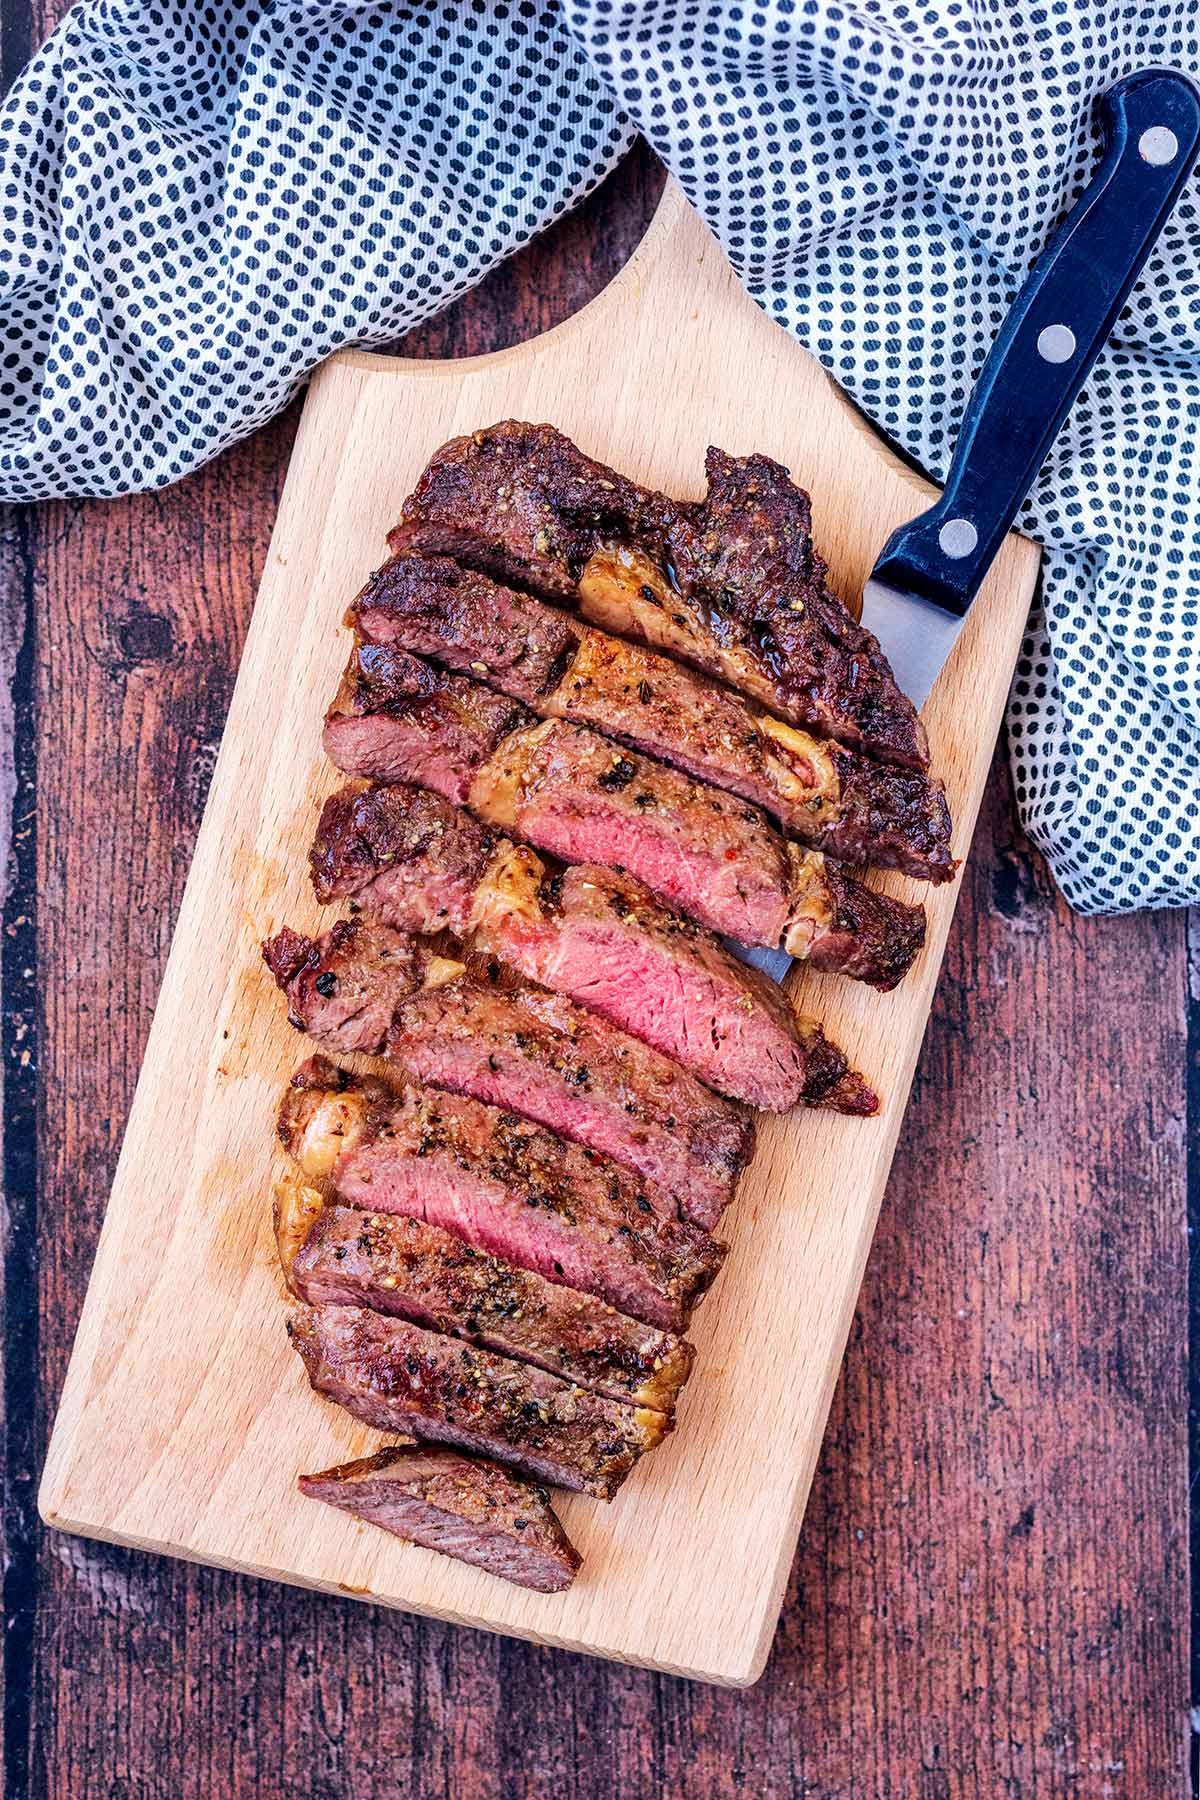 Sliced cooked steak on a wooden board with a knife.